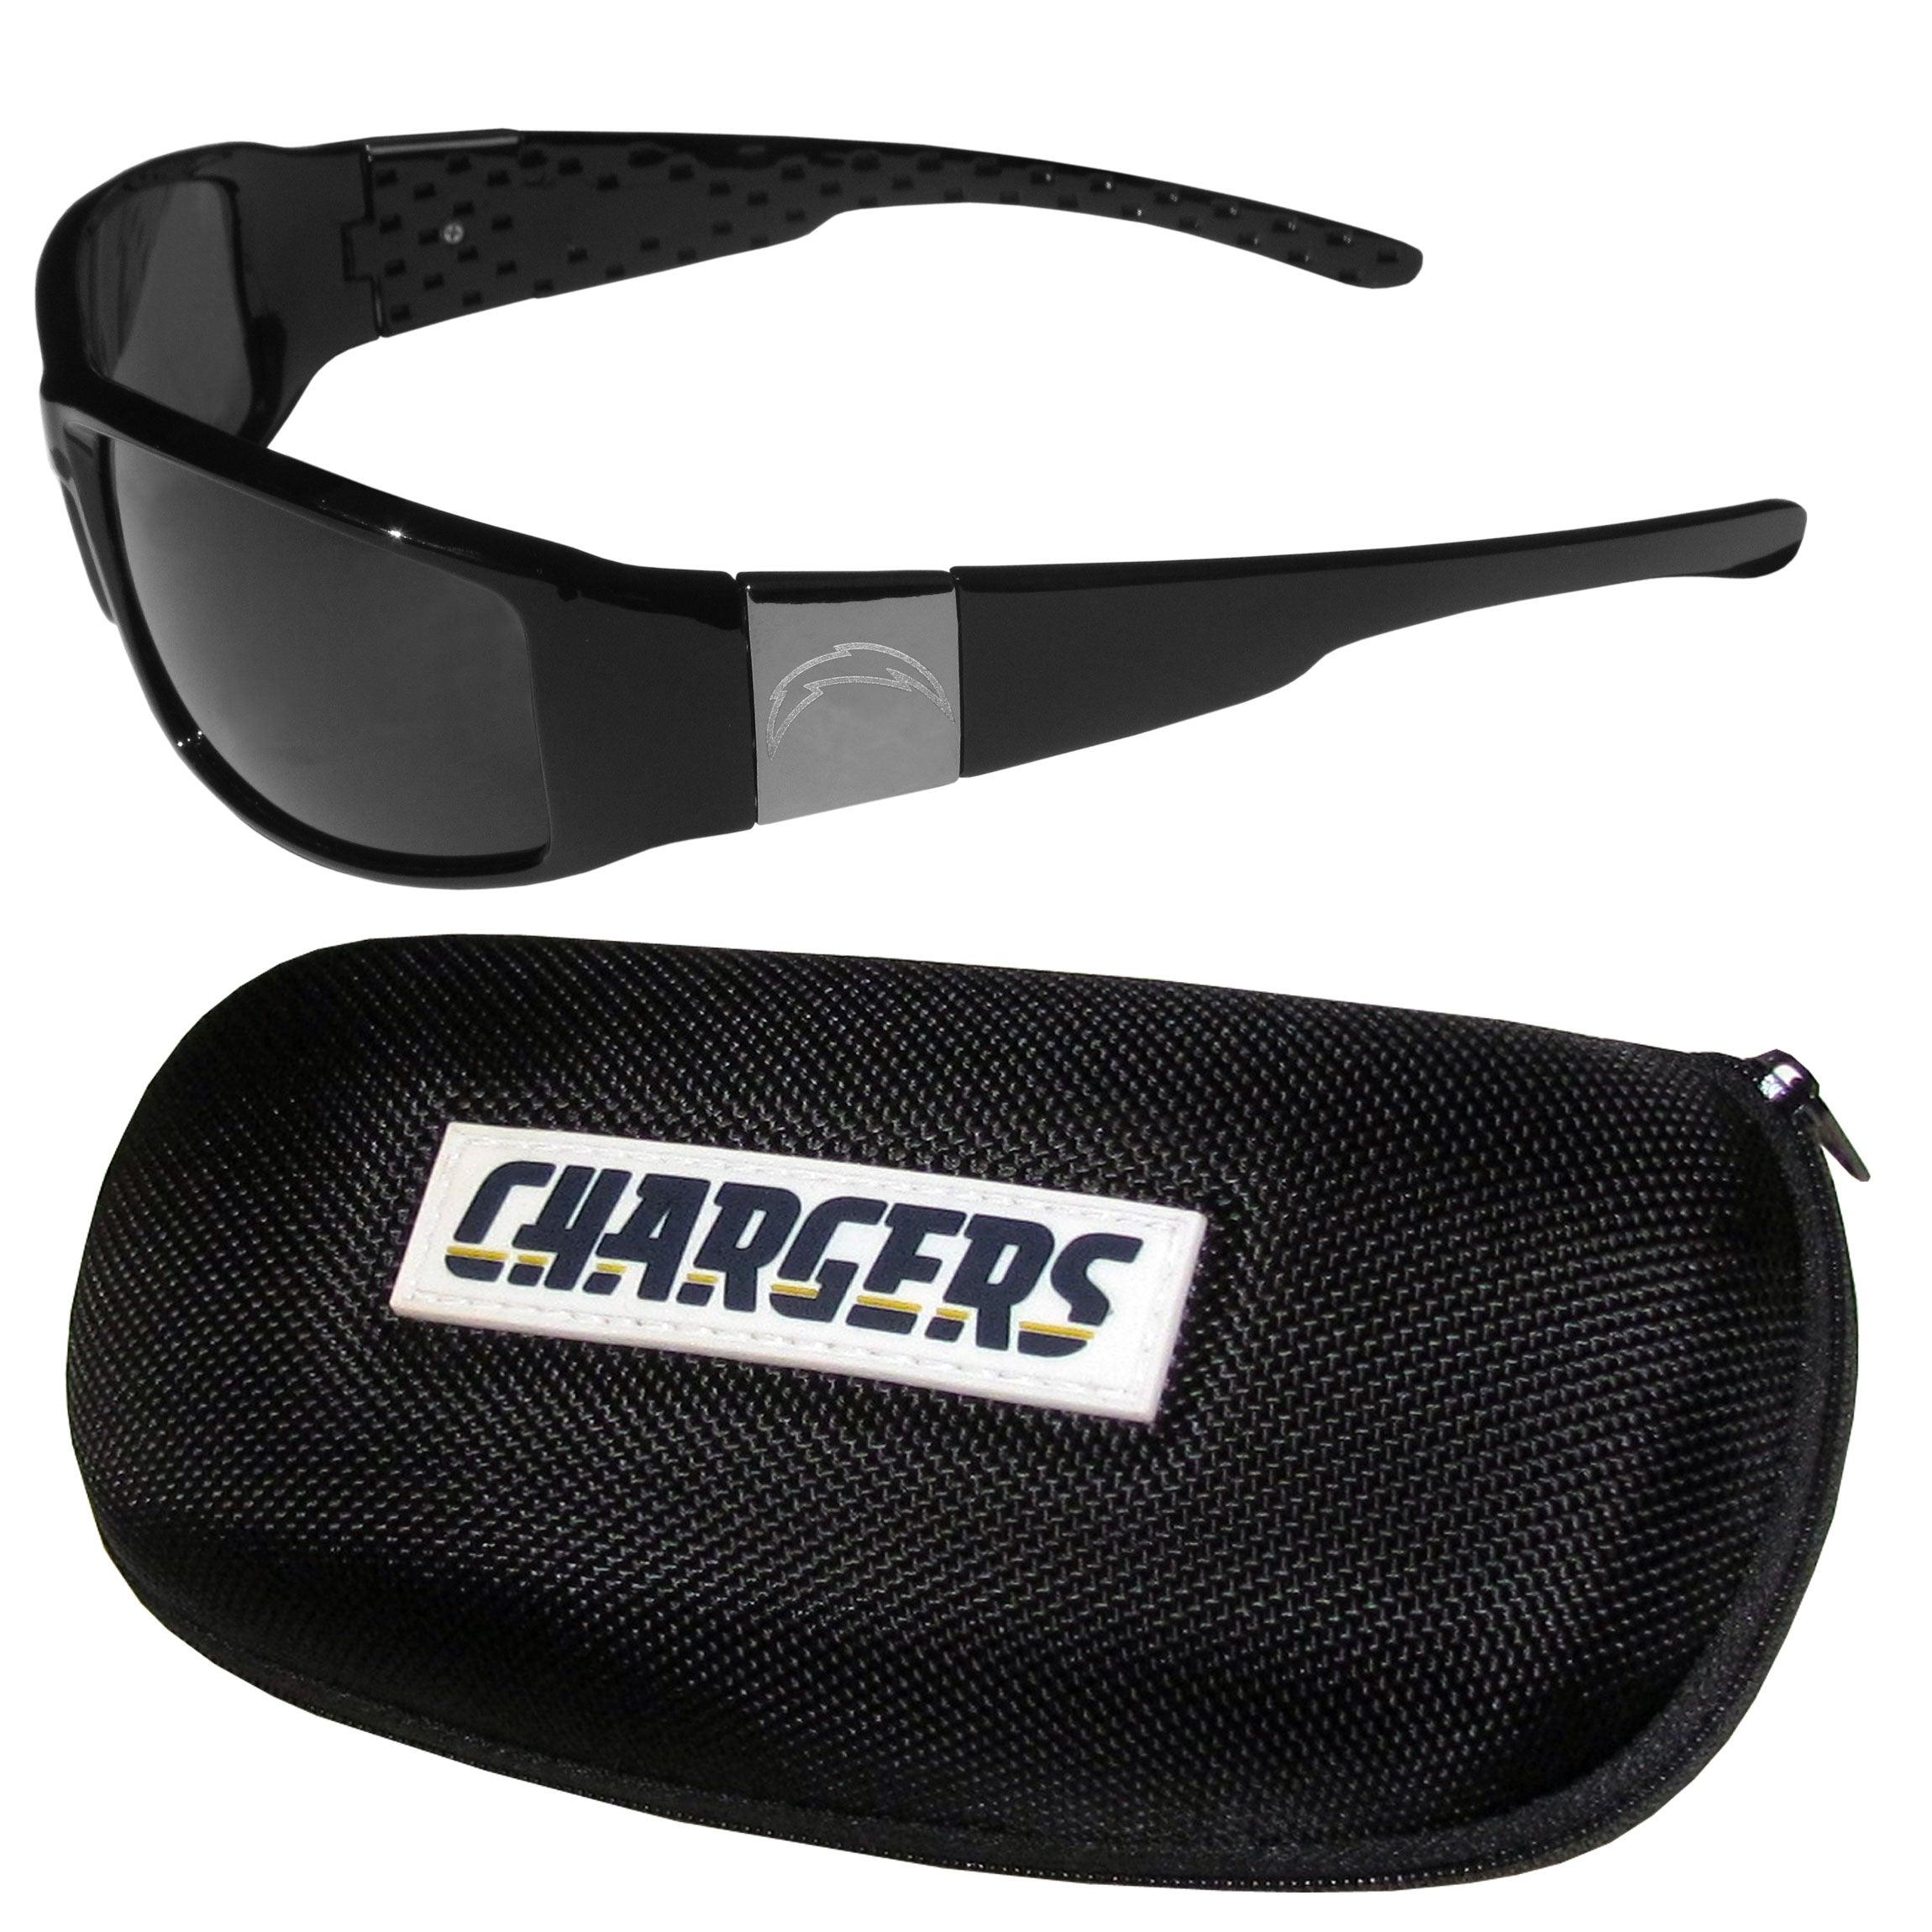 Los Angeles Chargers Chrome Wrap Sunglasses and Zippered Carrying Case - Flyclothing LLC